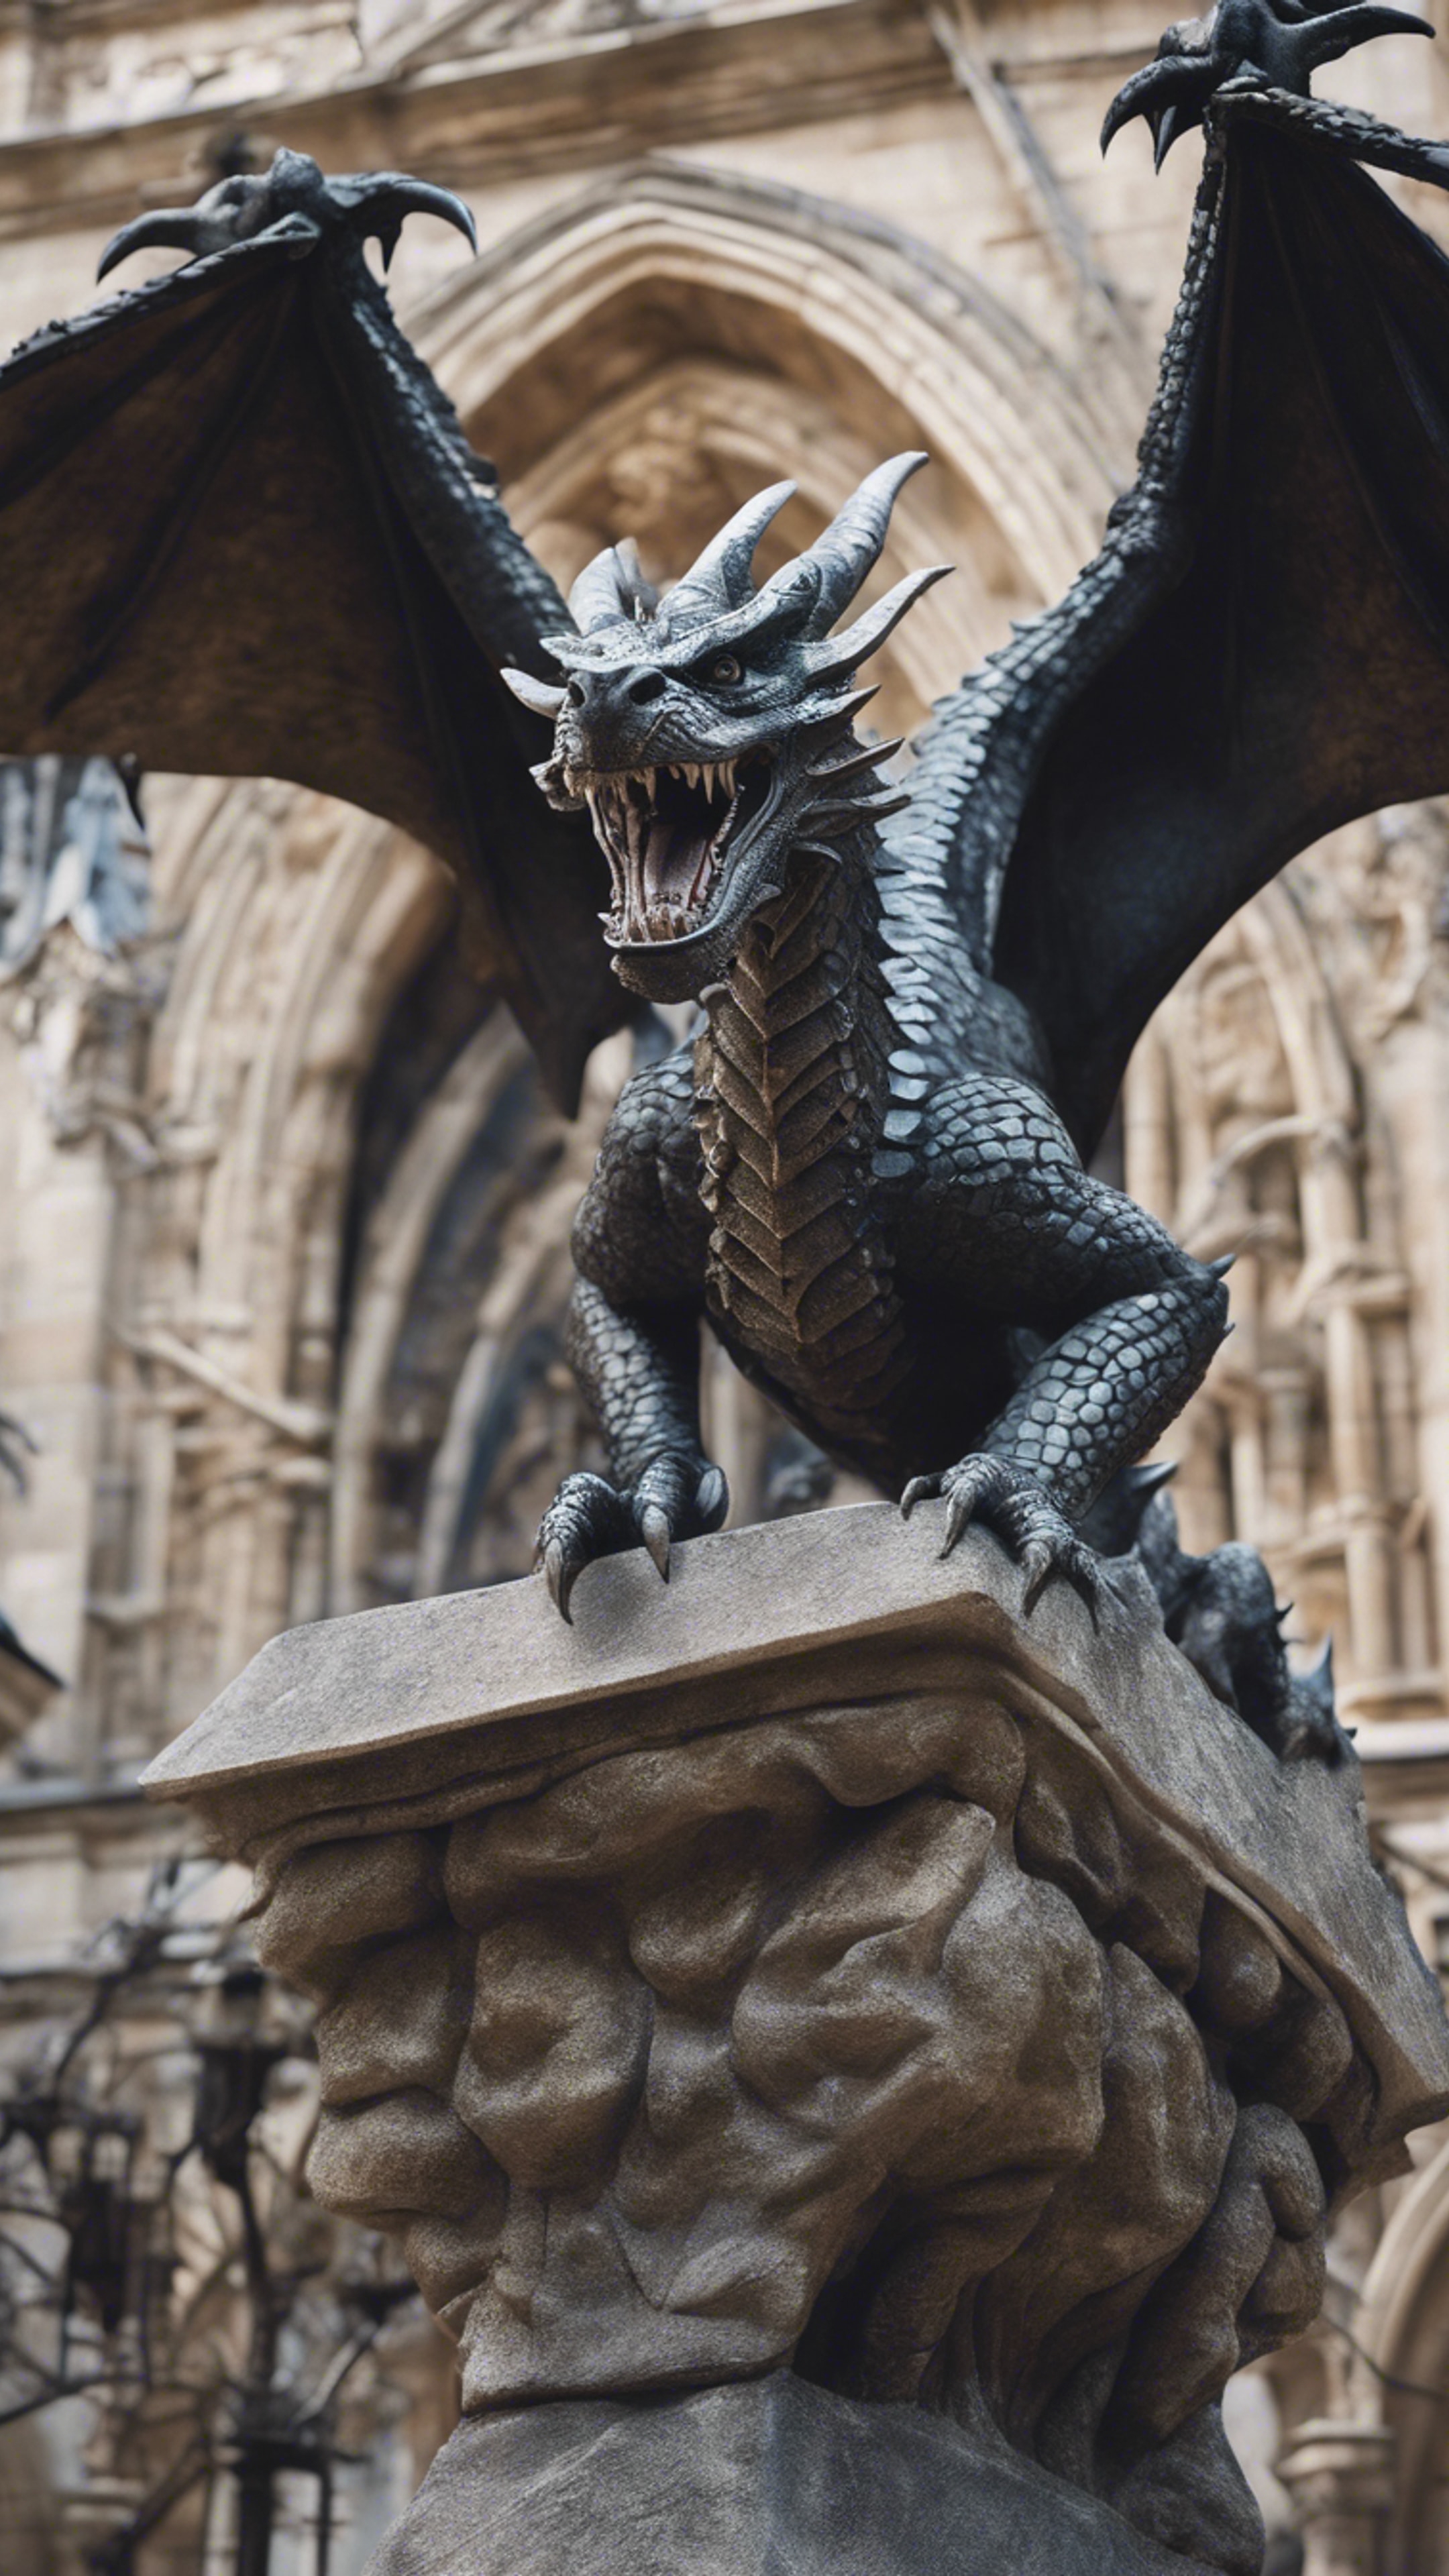 A stone dragon coming to life from the sculpture in a gothic cathedral's courtyard. Валлпапер[86d9df9db55943e58db6]